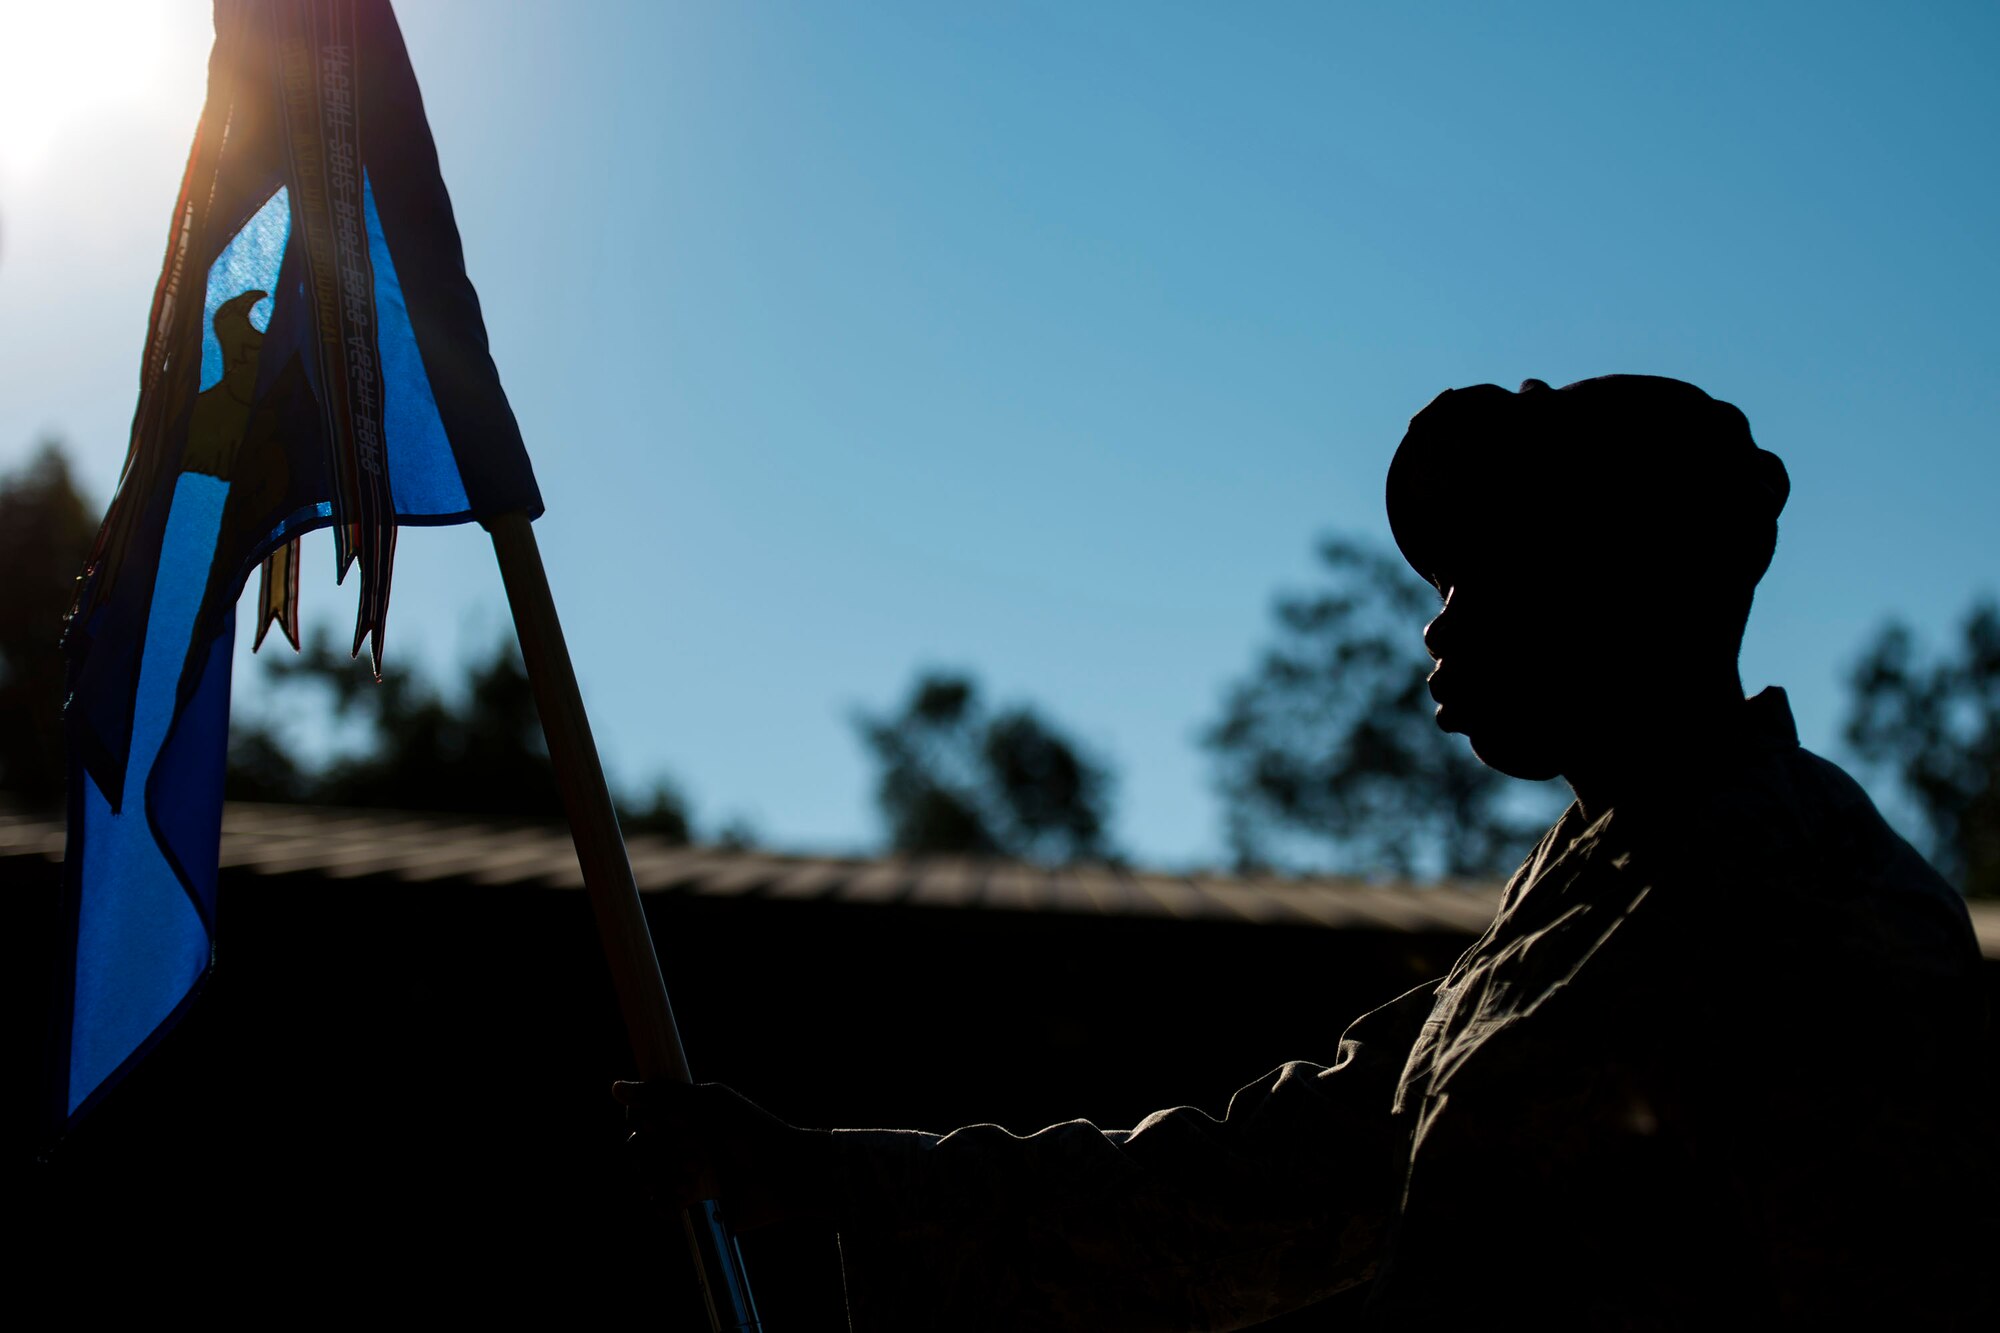 Staff Sgt. Zachariah Parker, 105th Base Defense Squadron fire team leader, Stewart Air National Guard Base, N.Y., stands at parade rest during the 820th Base Defense Group (BDG) change of command ceremony, July 12, 2018, at Moody Air Force Base, Ga. The ceremony represents the formal passing of responsibility, authority and accountability of command from one officer to another. Col. Benito Barron, 820th BDG commander, who recently relinquished his duties as the Chief of the Homeland Defense and Protection Division for Headquarters United States Northern Command, will now command the 820th BDG. The 820th BDG, which trains hand-in-hand with the 105th BDS, is the Air Force’s only unit specifically designed to provide fully integrated defense operations. (U.S. Air Force photo by Airman 1st Class Erick Requadt)